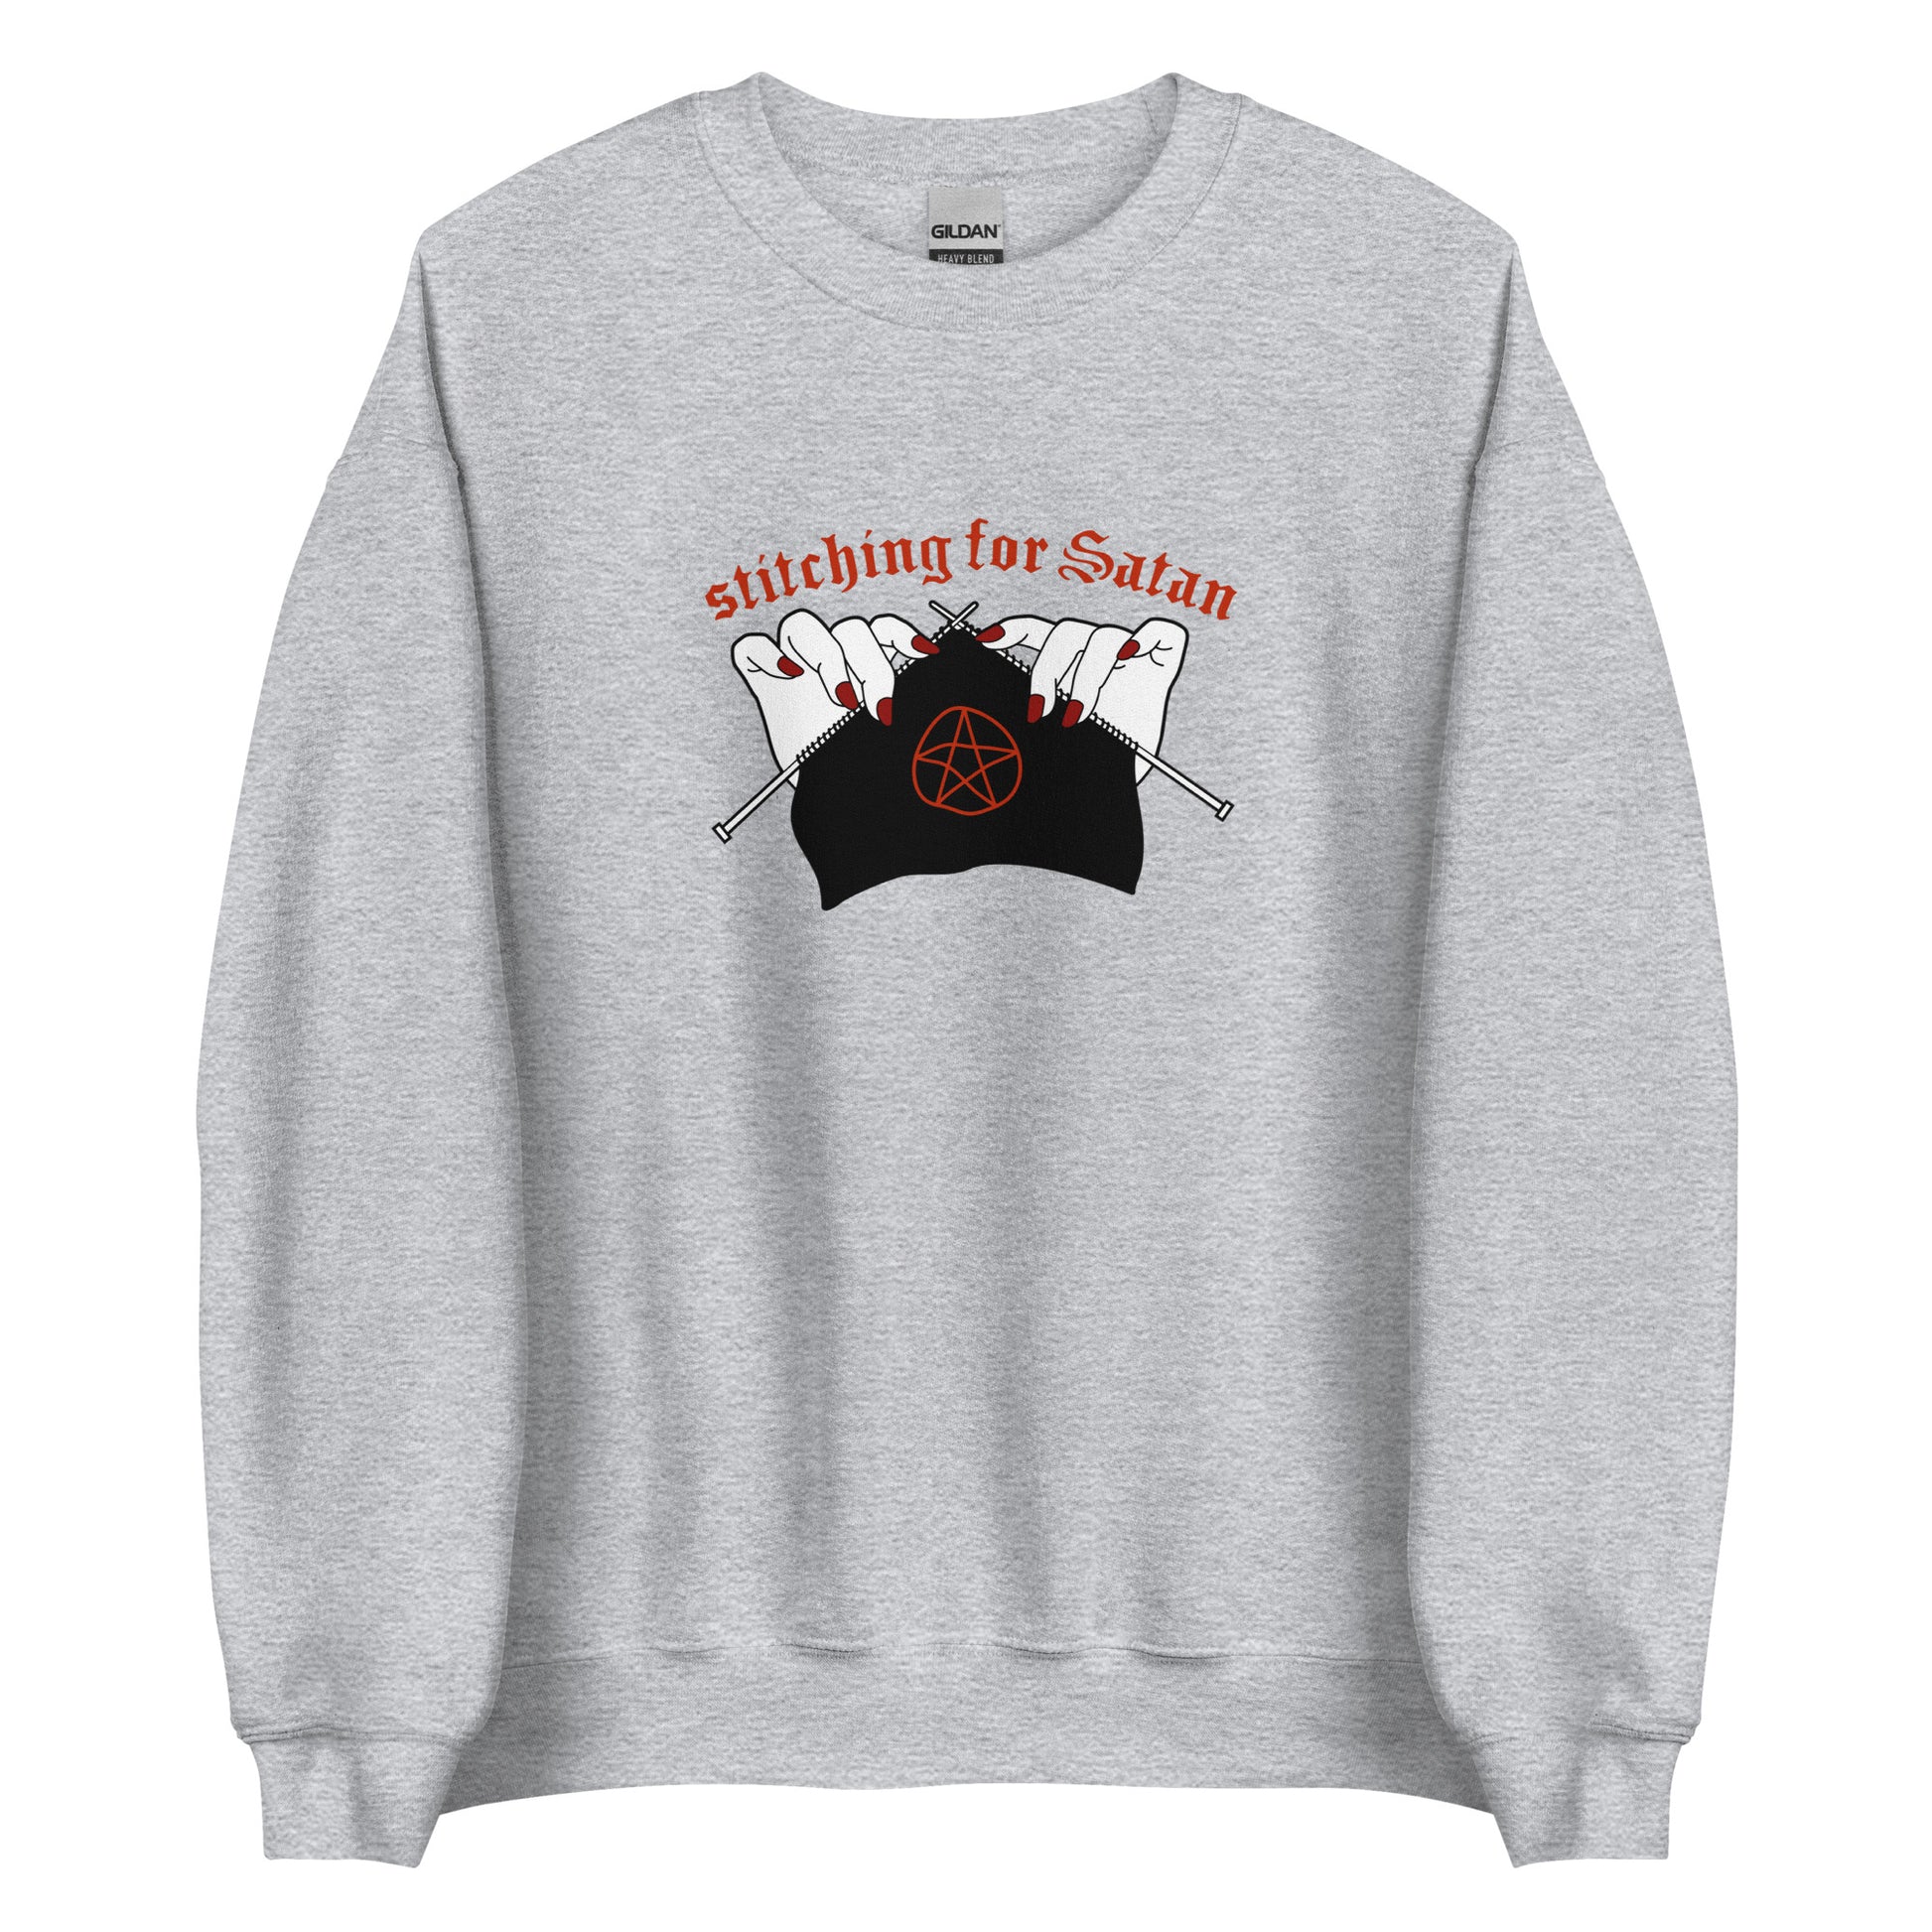 A grey crewneck sweatshirt featuring an illustration of pale white hands with red fingernails holding knitting needles. Fabric on the needles features a red pentagram. Text above the hands reads "stitching for Satan" in a gothc red font.